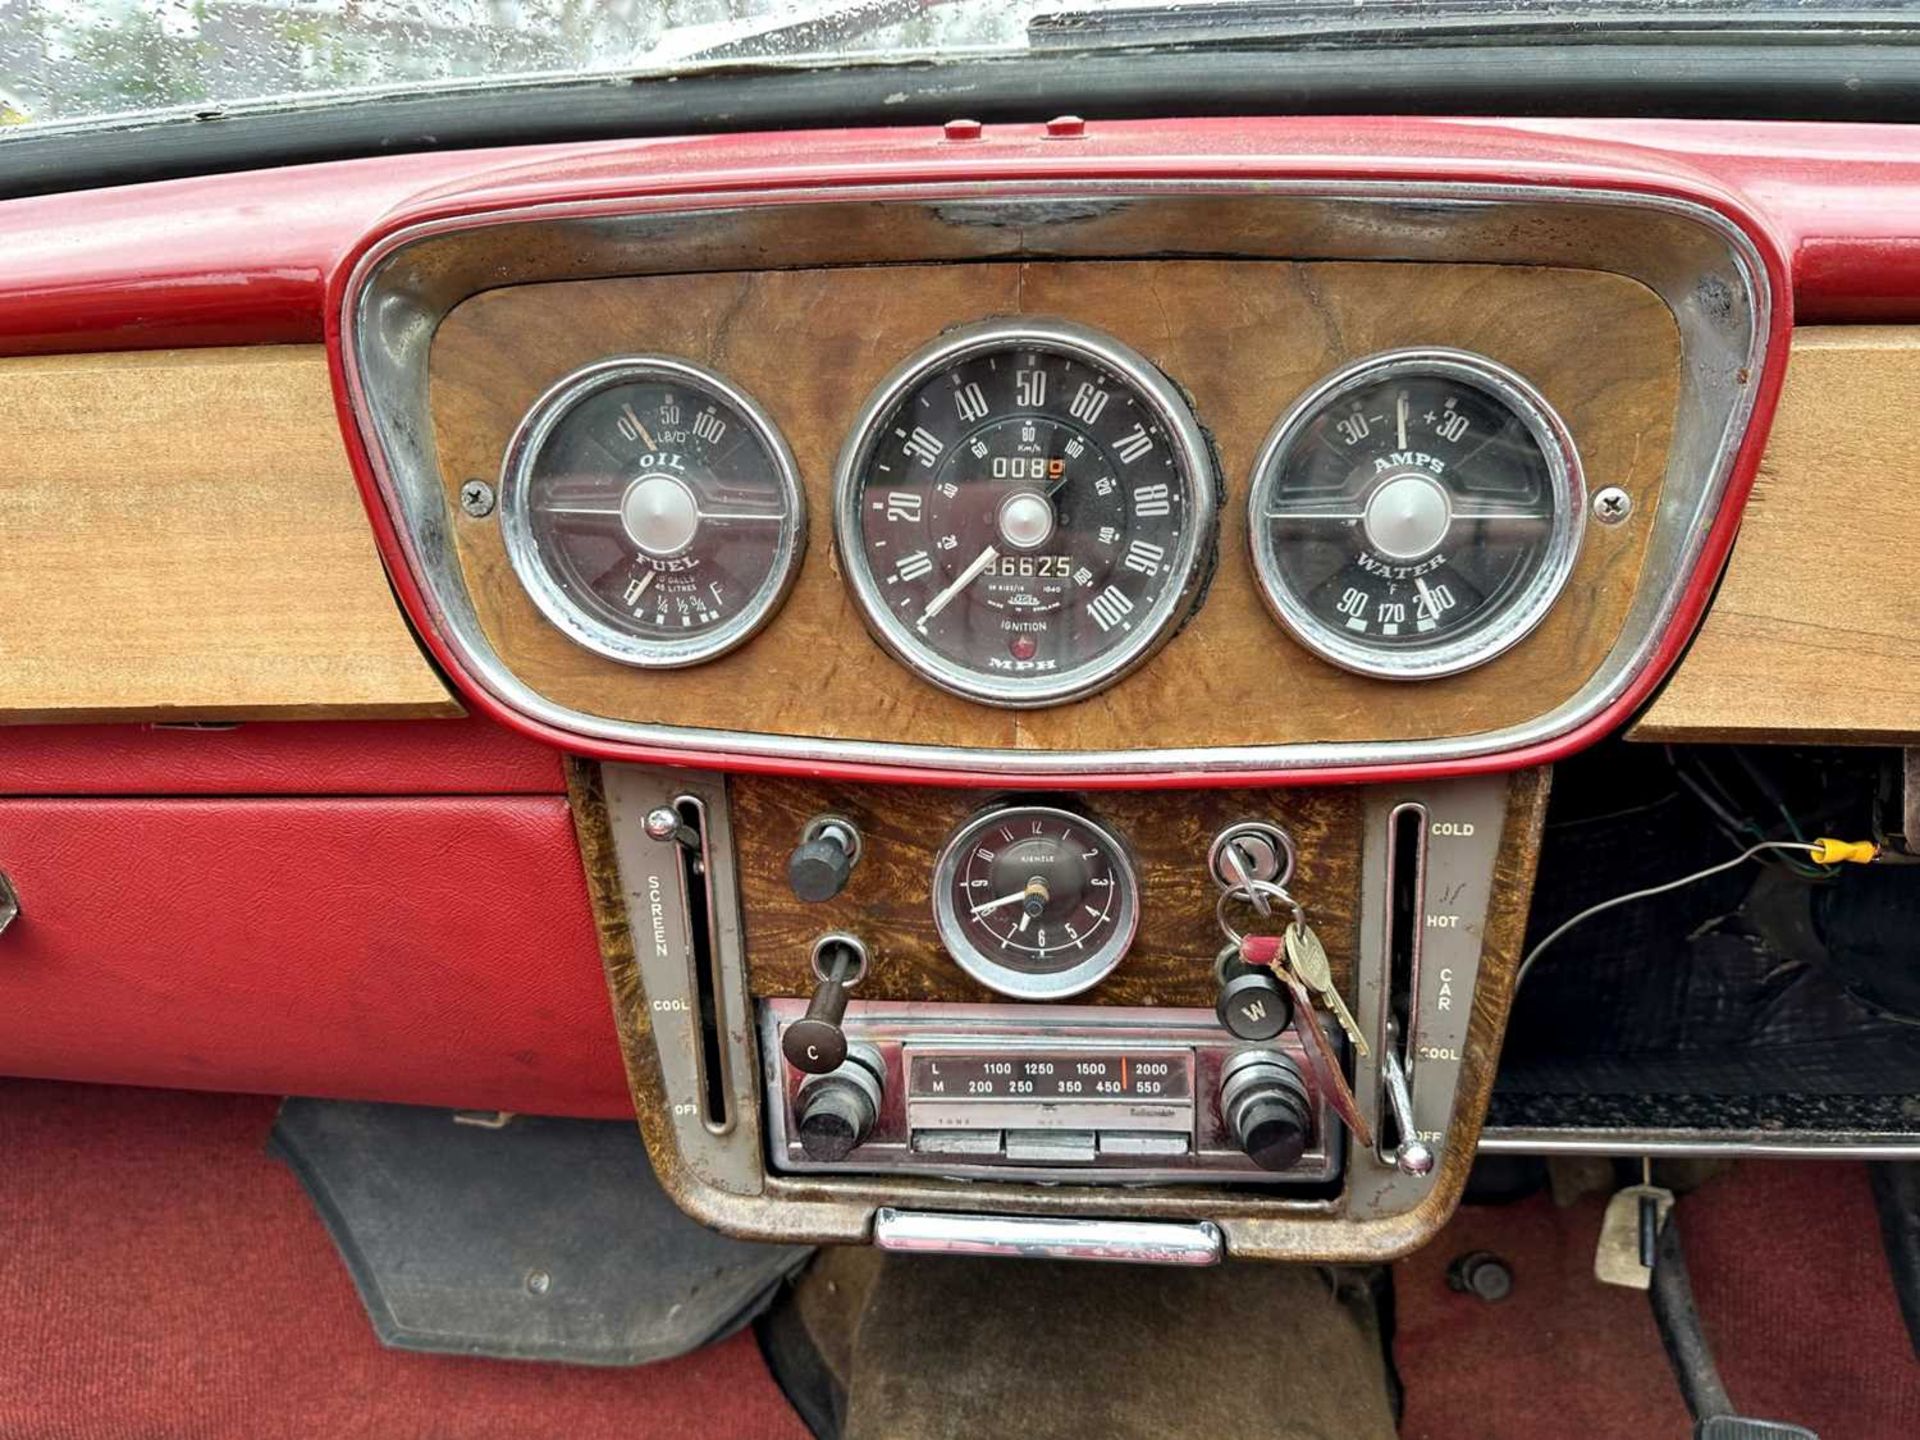 1961 Singer Gazelle Convertible Comes complete with overdrive, period radio and badge bar - Image 62 of 95